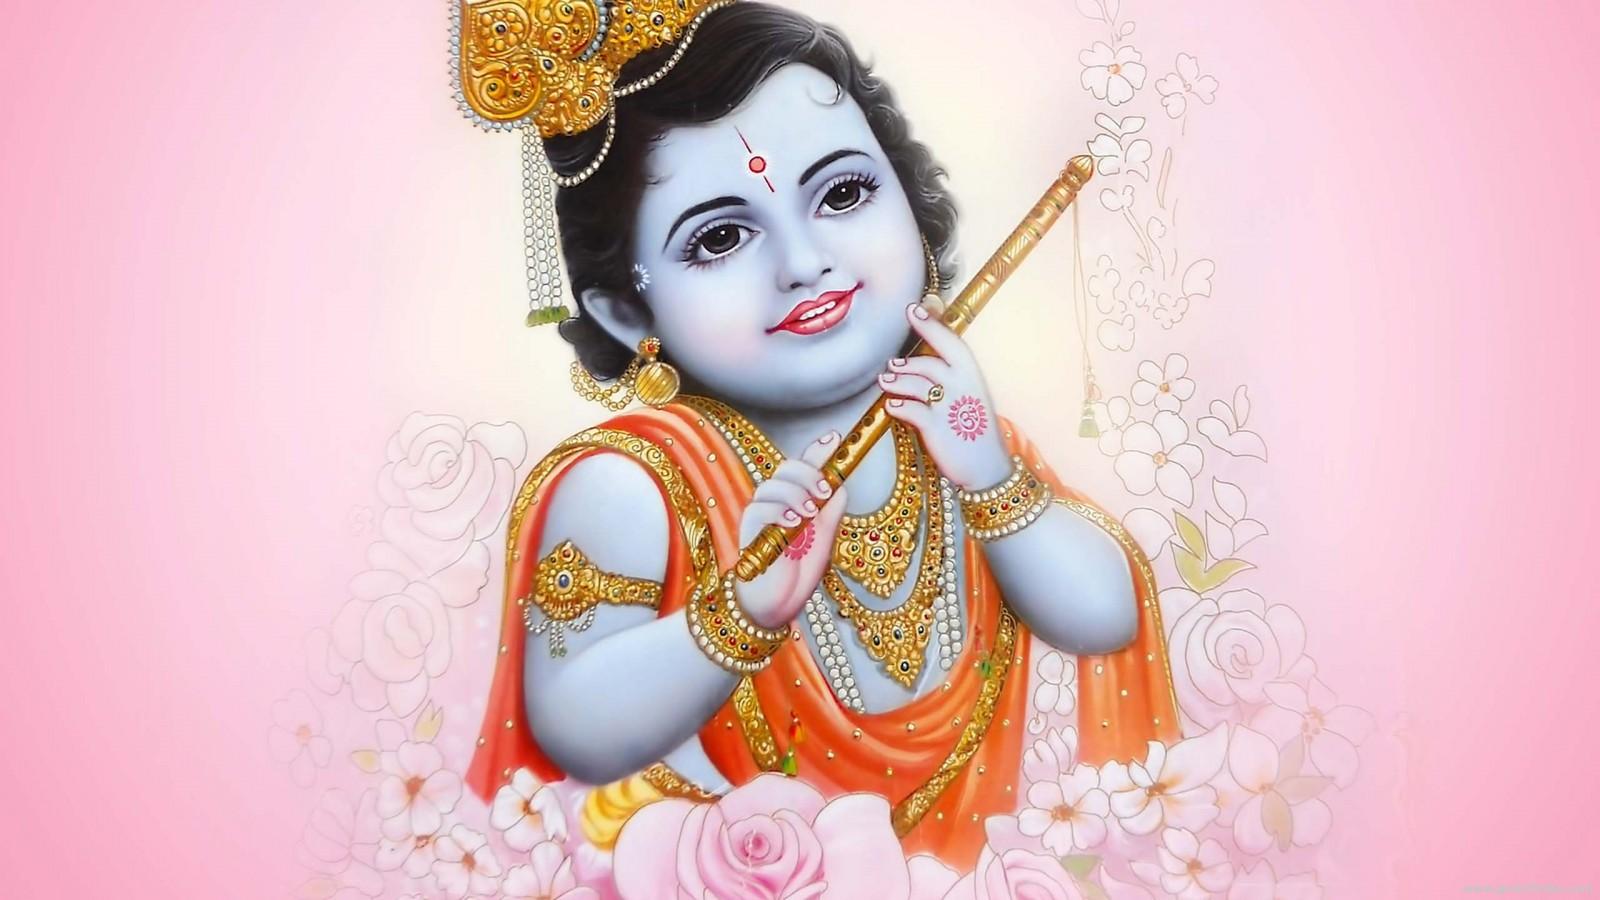 Download Bal krishna day image for your mobile cell phone